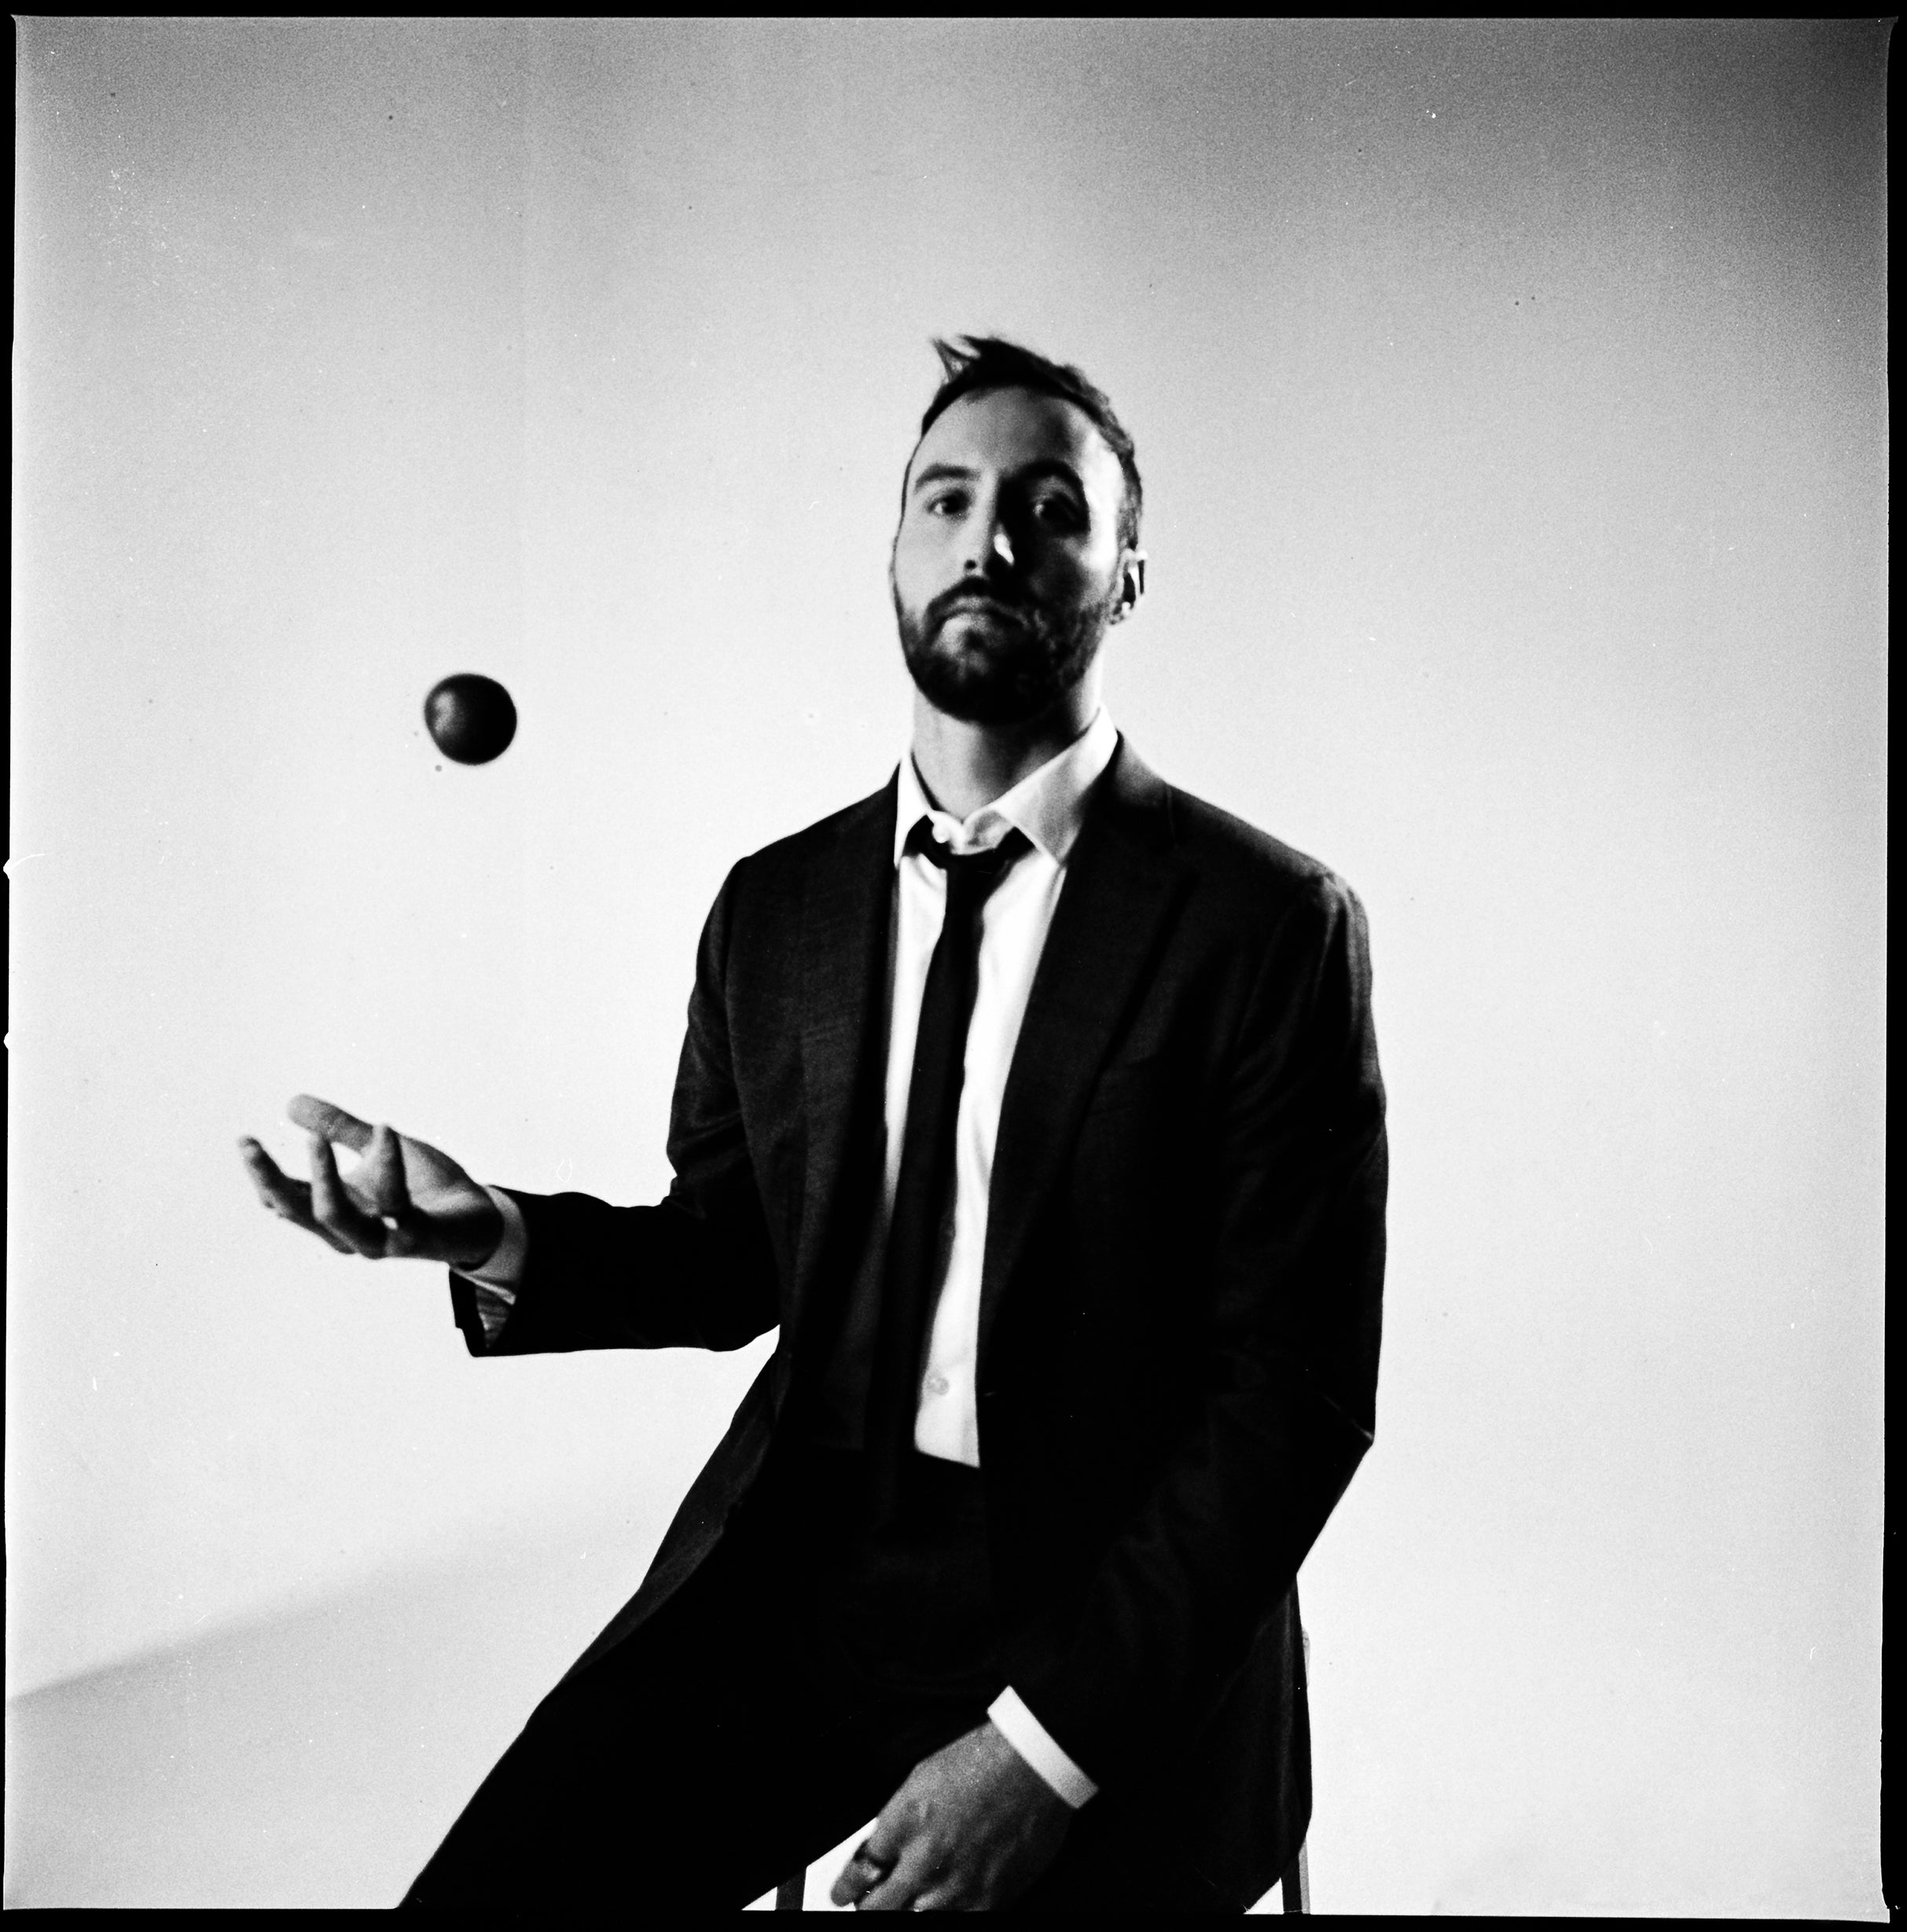 Ruston Kelly - The Weakness Tour in San Francisco event information